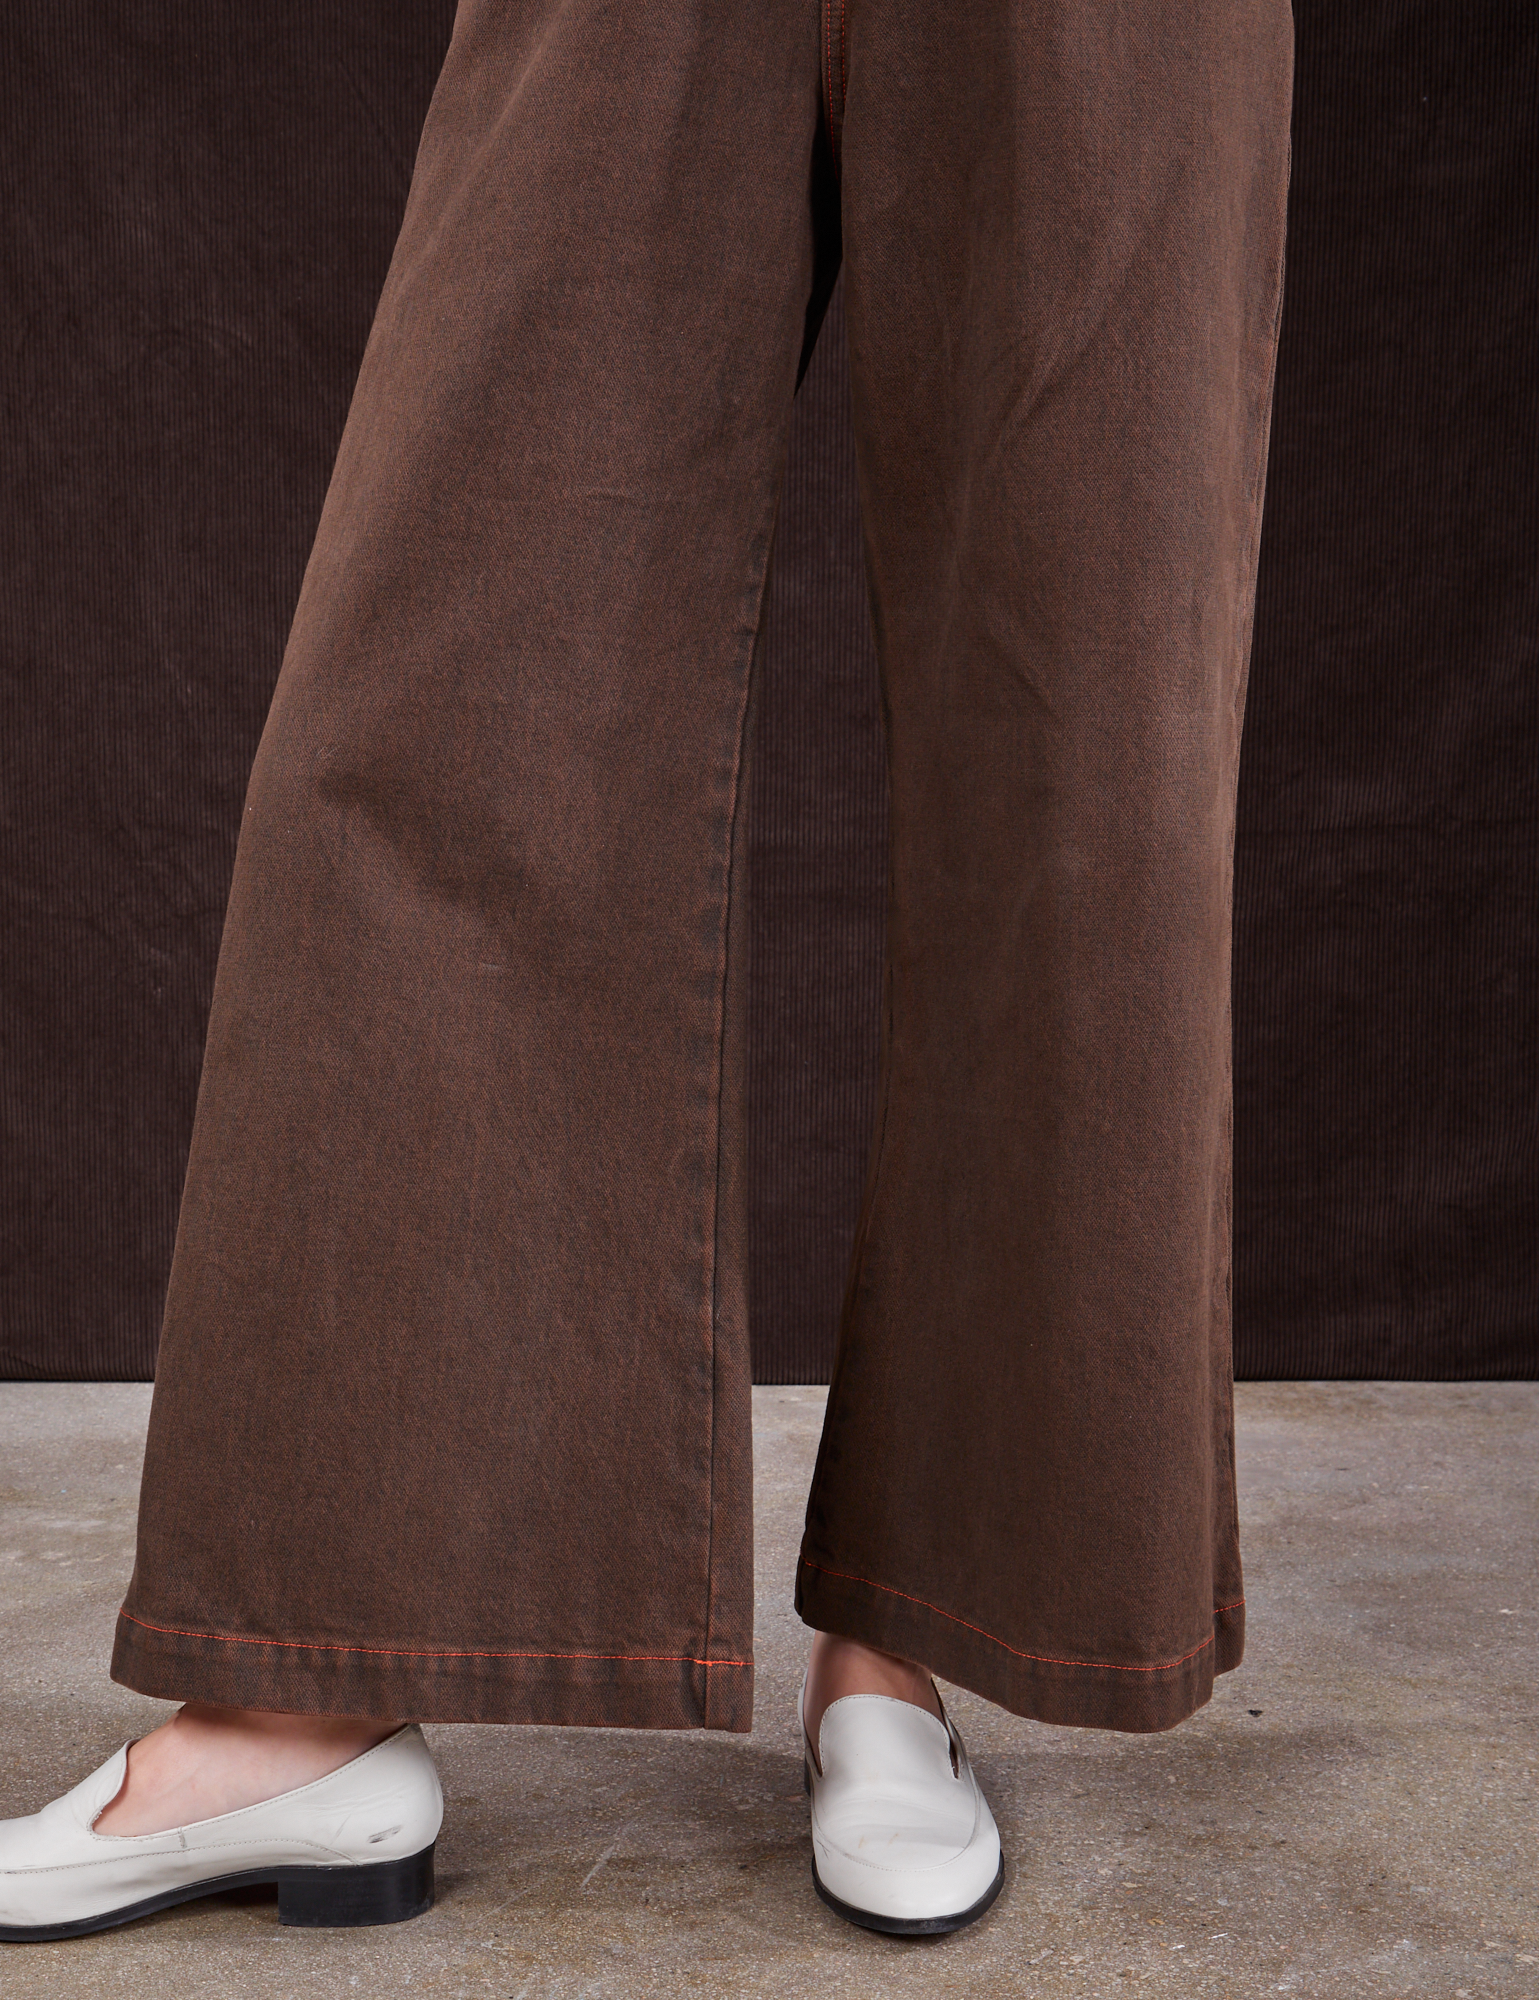 Overdyed Wide Leg Trousers in Brown pant leg close up on Alex